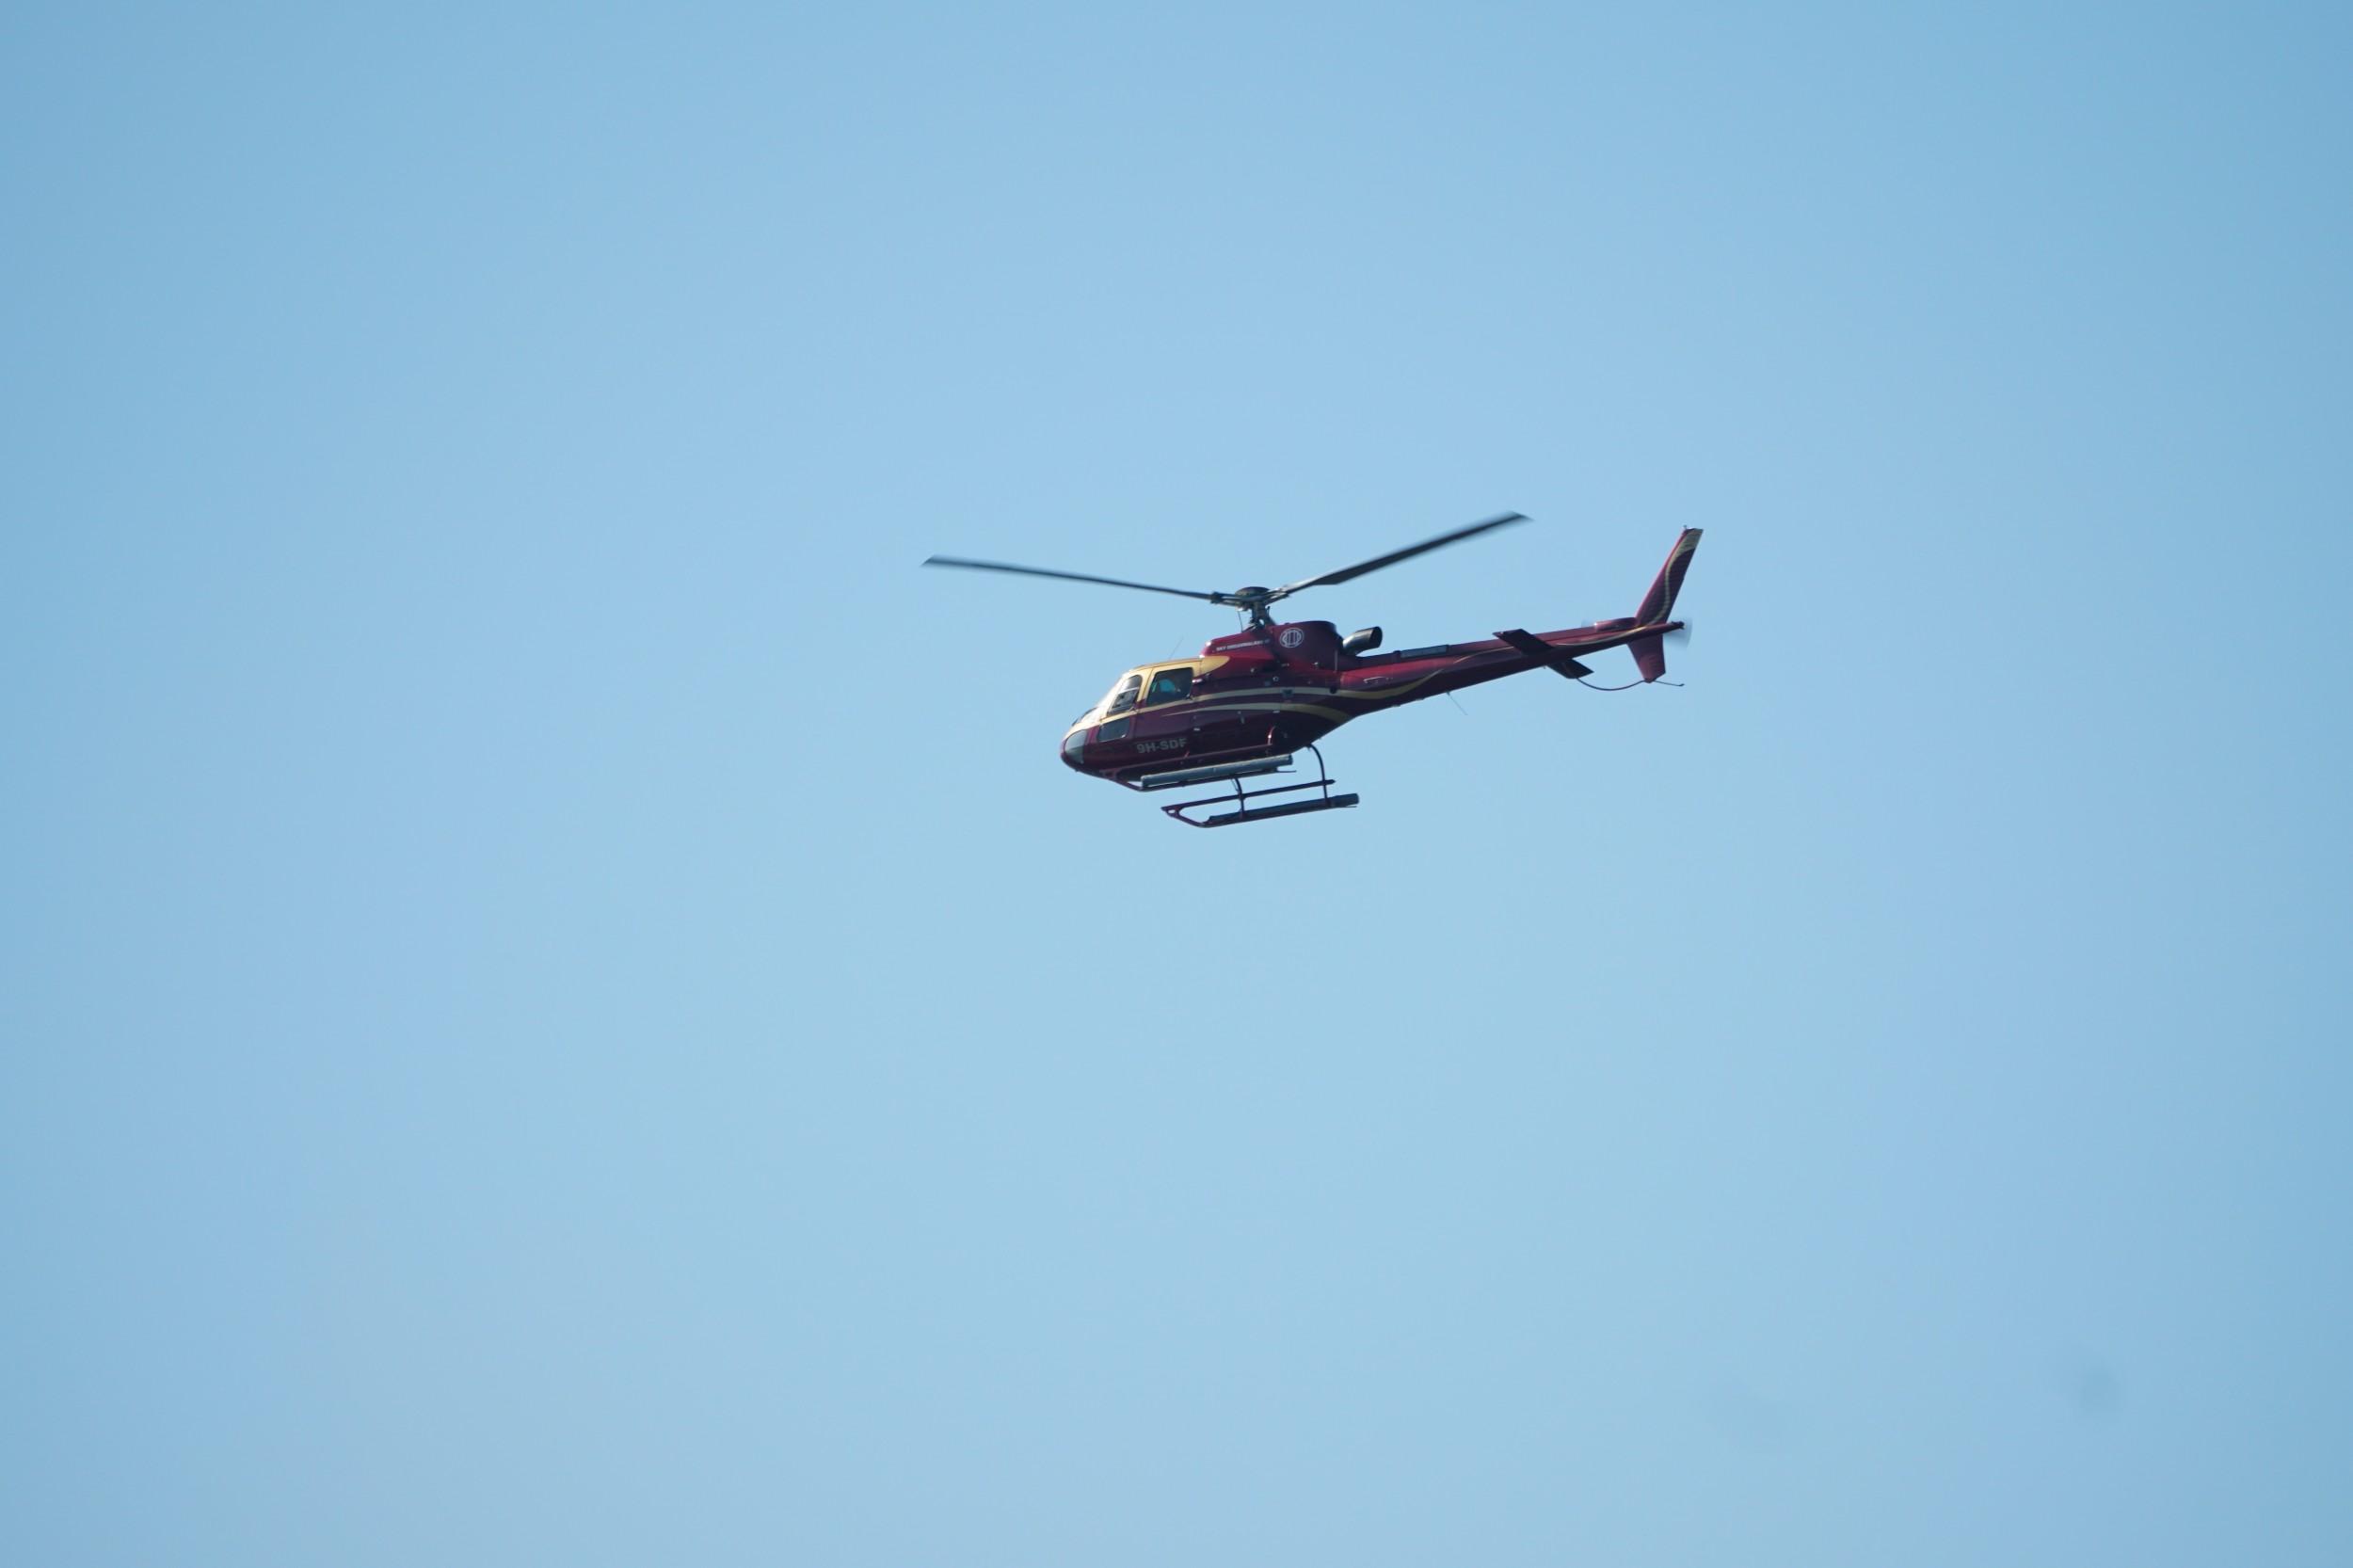 Helicopter over Aquatic Cove